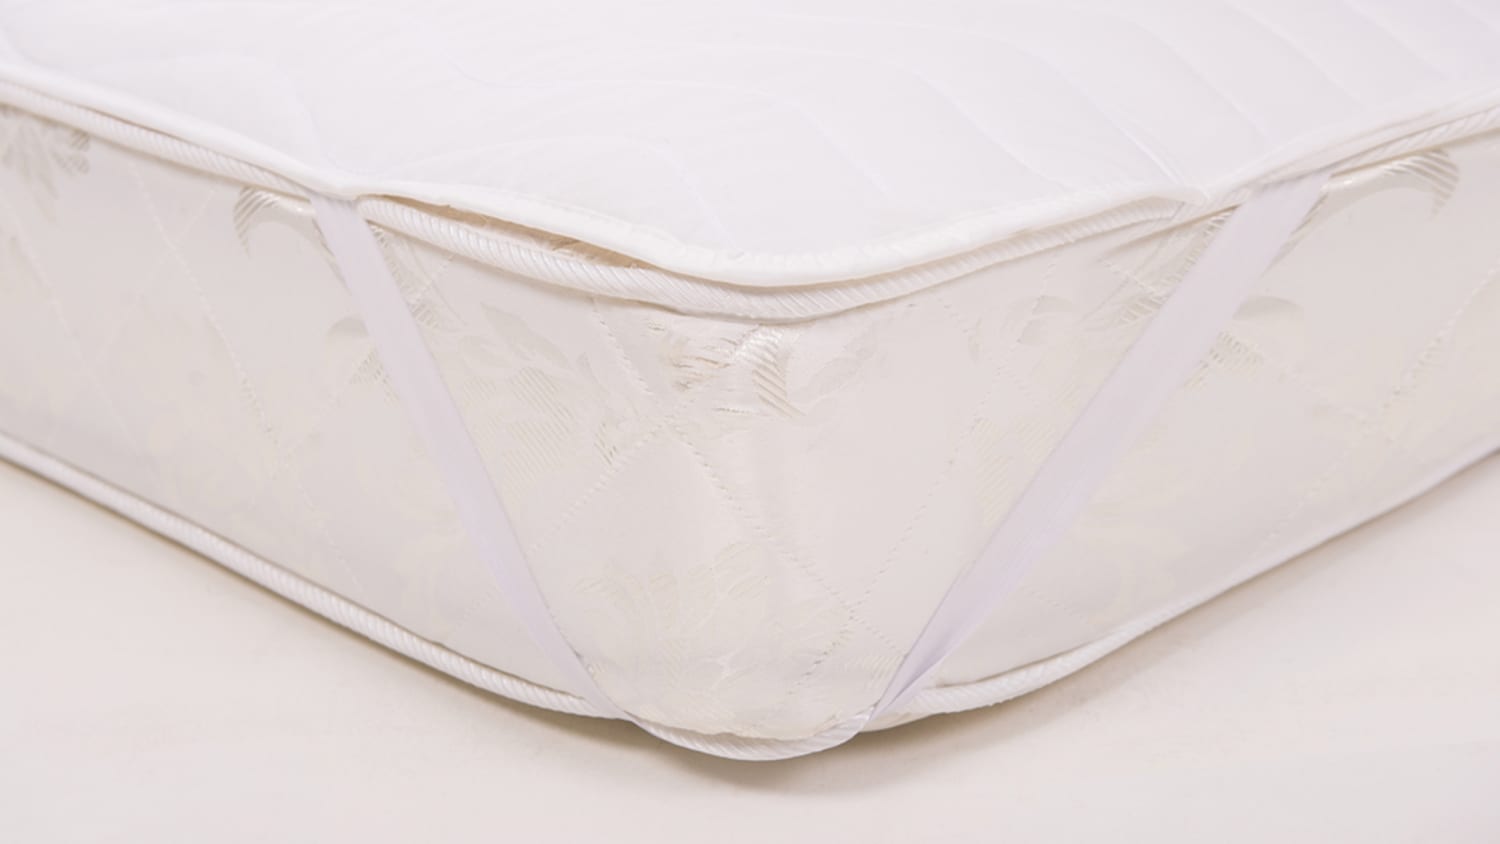 How to clean a mattress pad